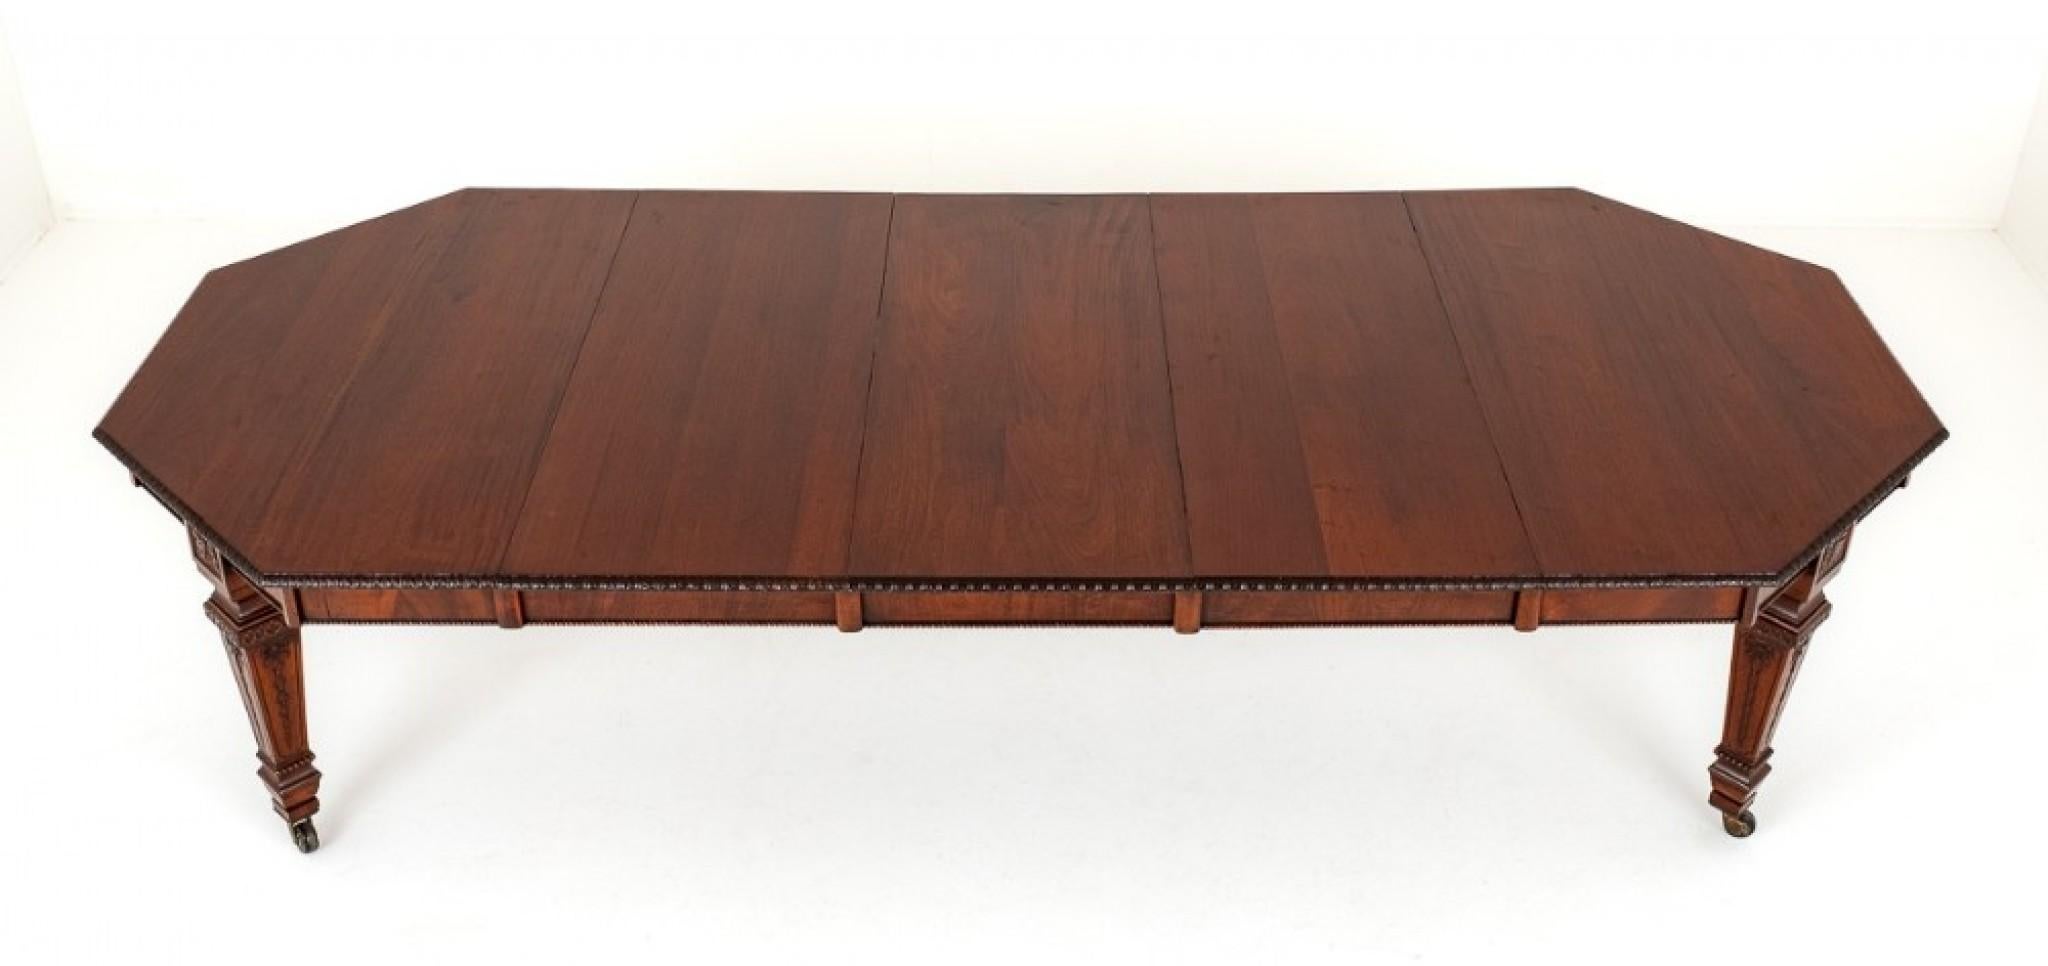 Victorian Dining Table Mahogany Octagonal End Extending 1850 For Sale 4